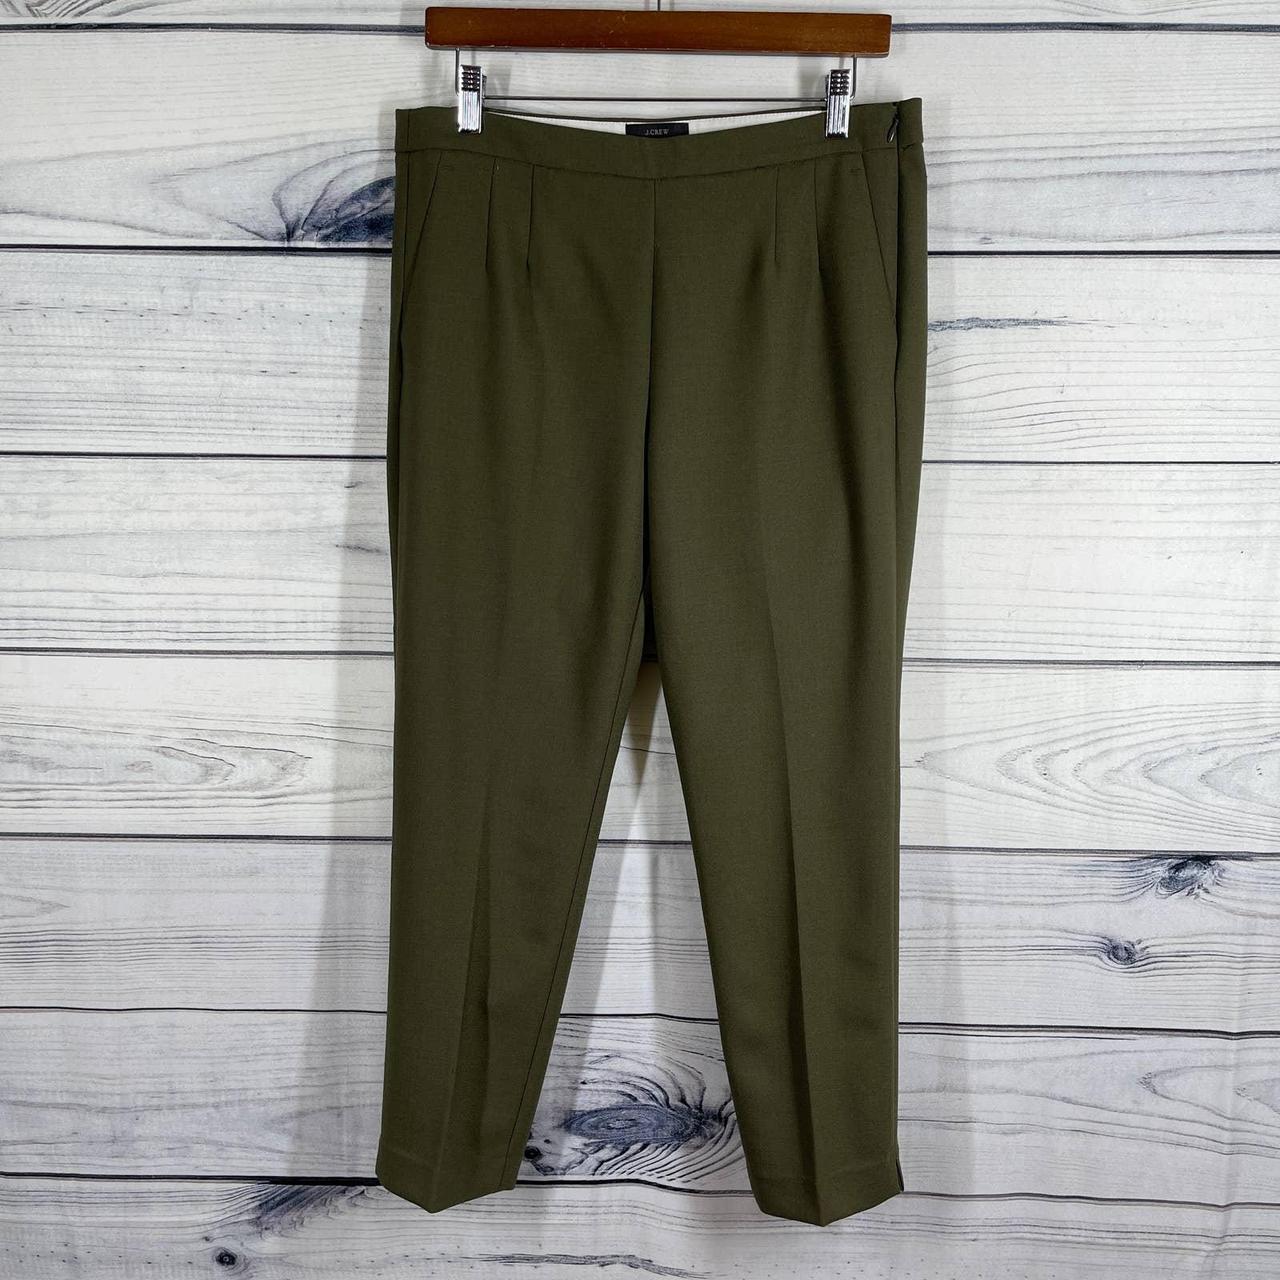 J Crew Martie Pant Cropped Wool Green Size